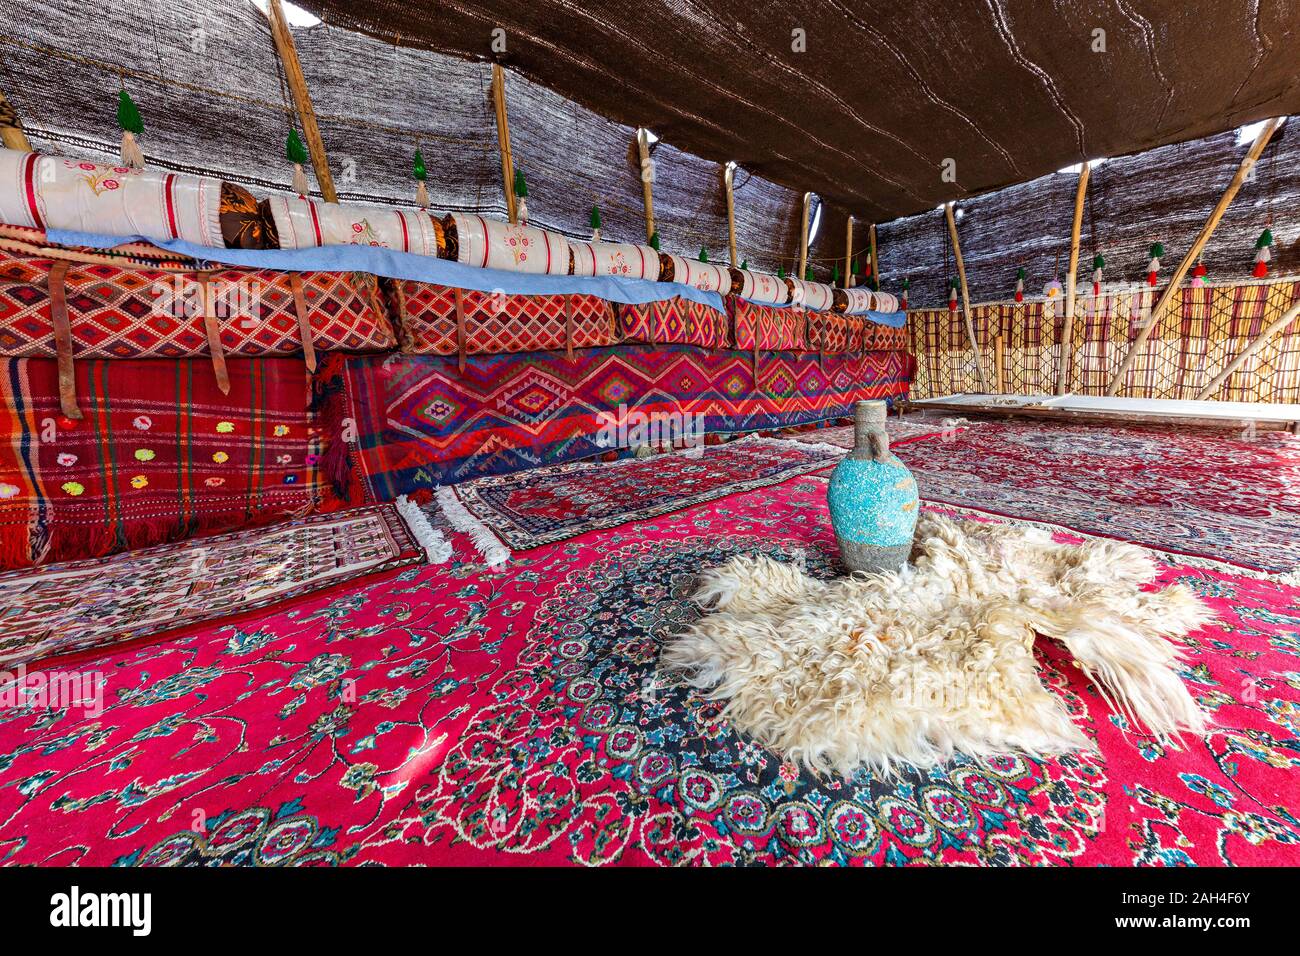 Colorful nomadic tent of Iranian nomadic people known as Qashqai, with a blue vase on the sheep skin, Iran Stock Photo